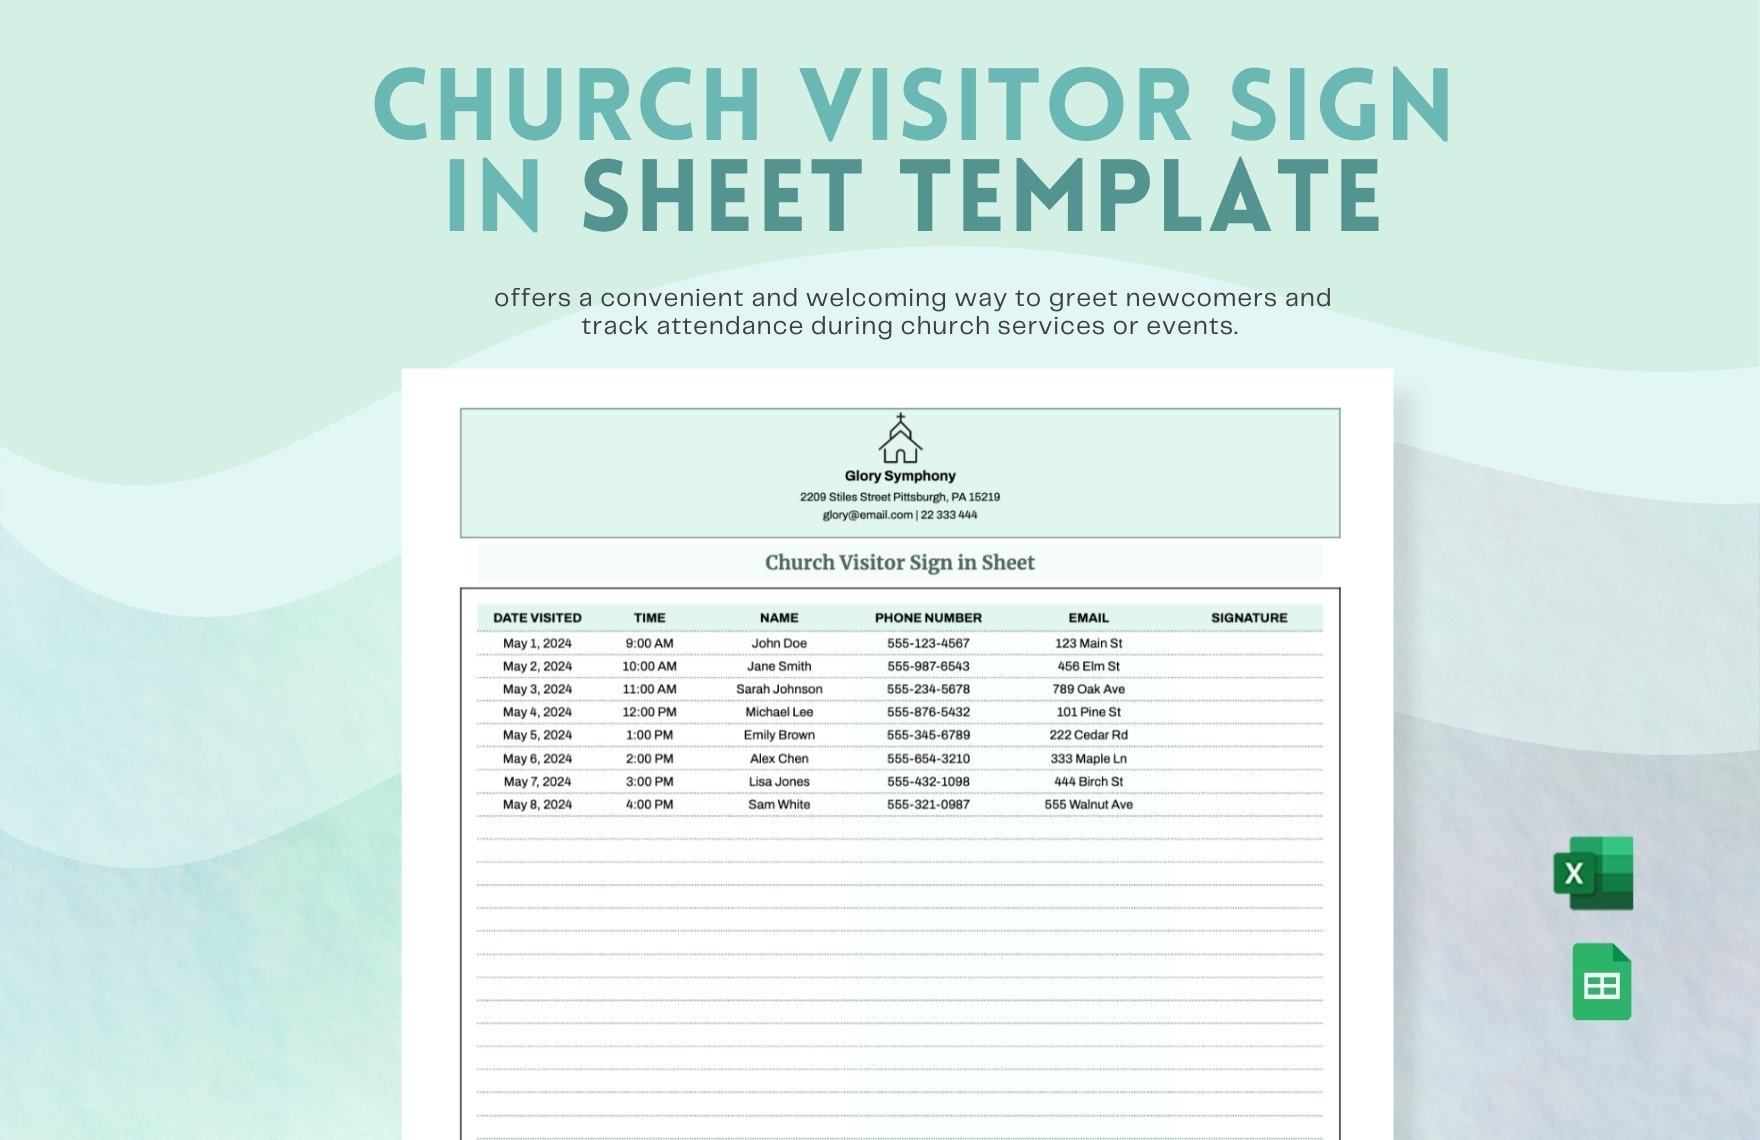 Church Visitor Sign in Sheet Template in Excel, Google Sheets